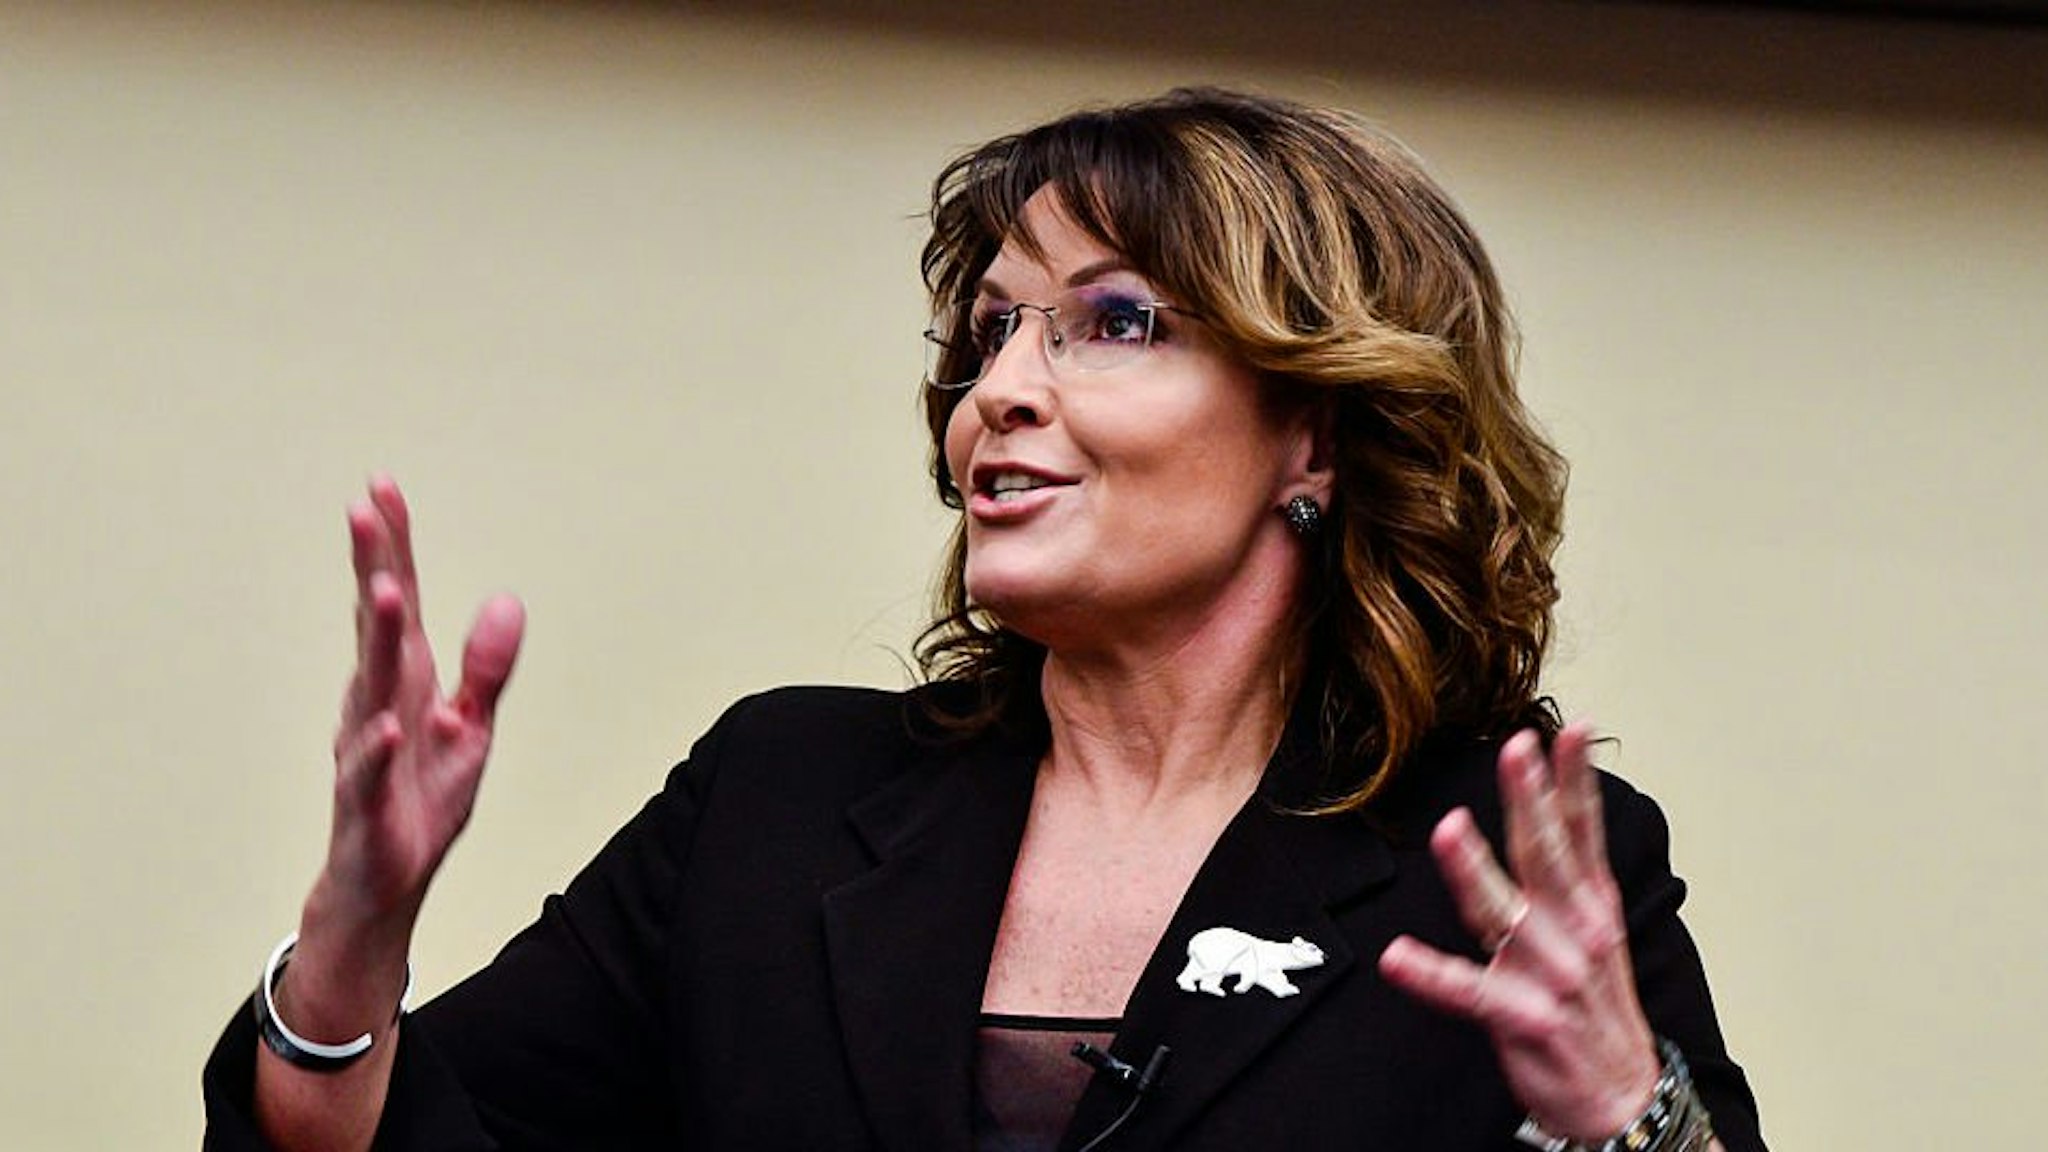 Former Governor Sarah Palin speaks during the "Climate Hustle" panel discussion at the Rayburn House Office Building on April 14, 2016 in Washington, DC.